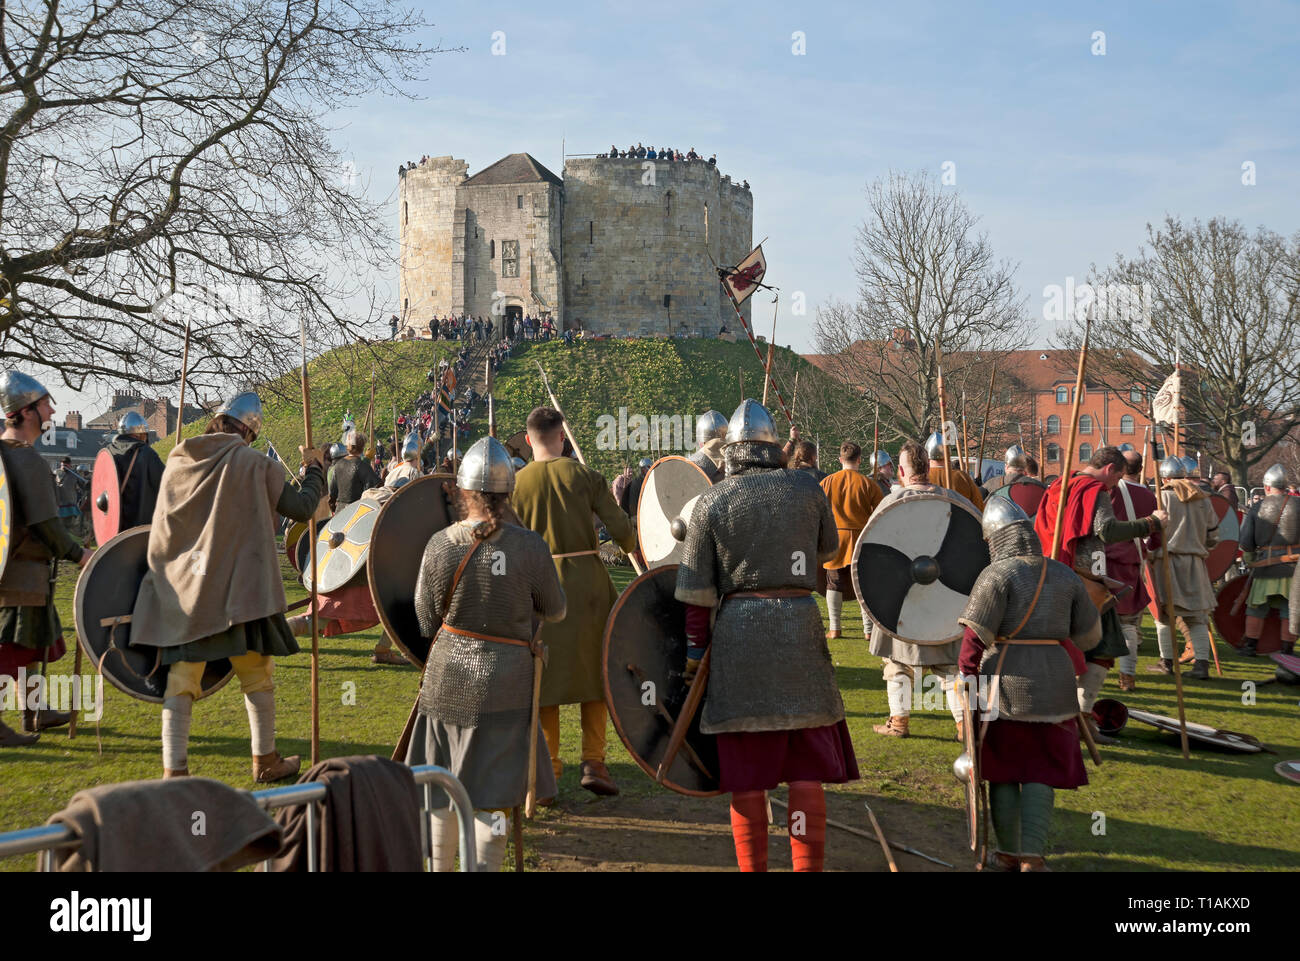 People dressed as Vikings and Anglo Saxons at the Viking Festival Clifford's Tower York North Yorkshire England UK United Kingdom GB Great Britain Stock Photo